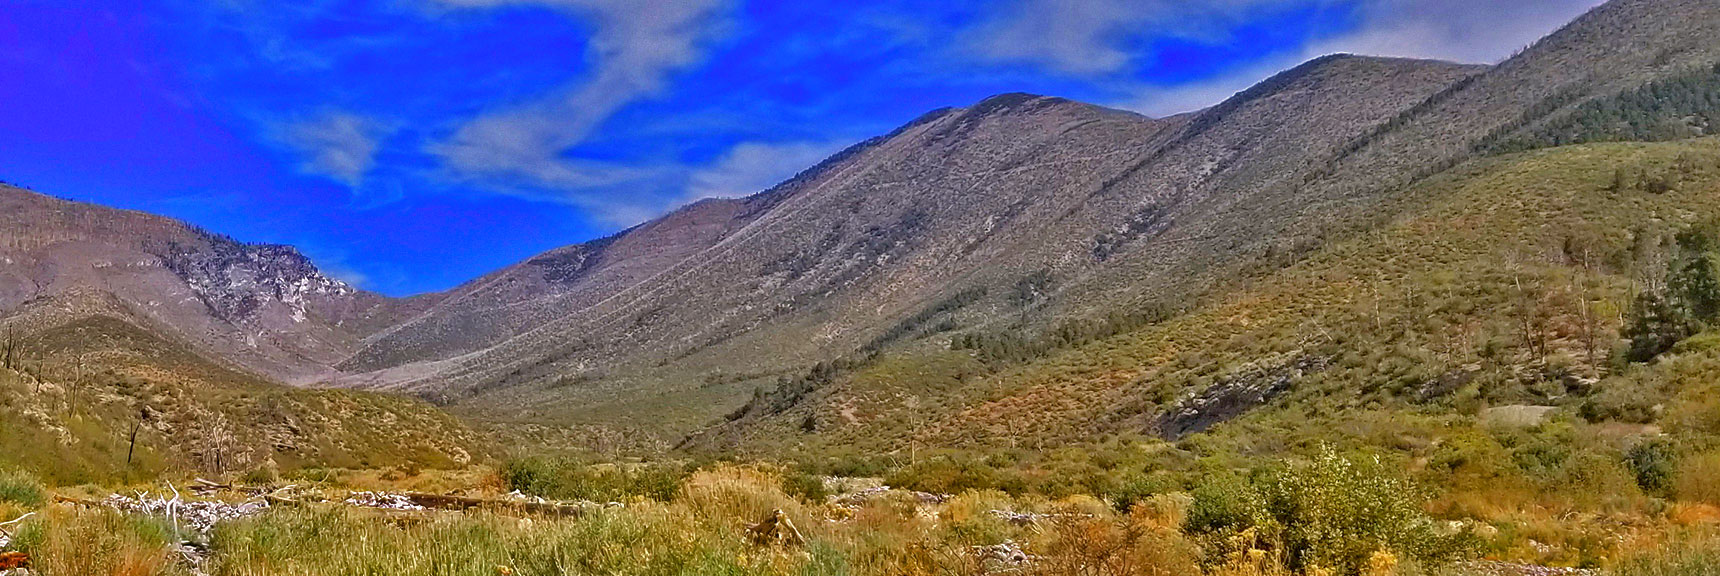 View Up Harris Mountain from Lovell Canyon | Harris Mountain Base from Lovell Canyon, Nevada